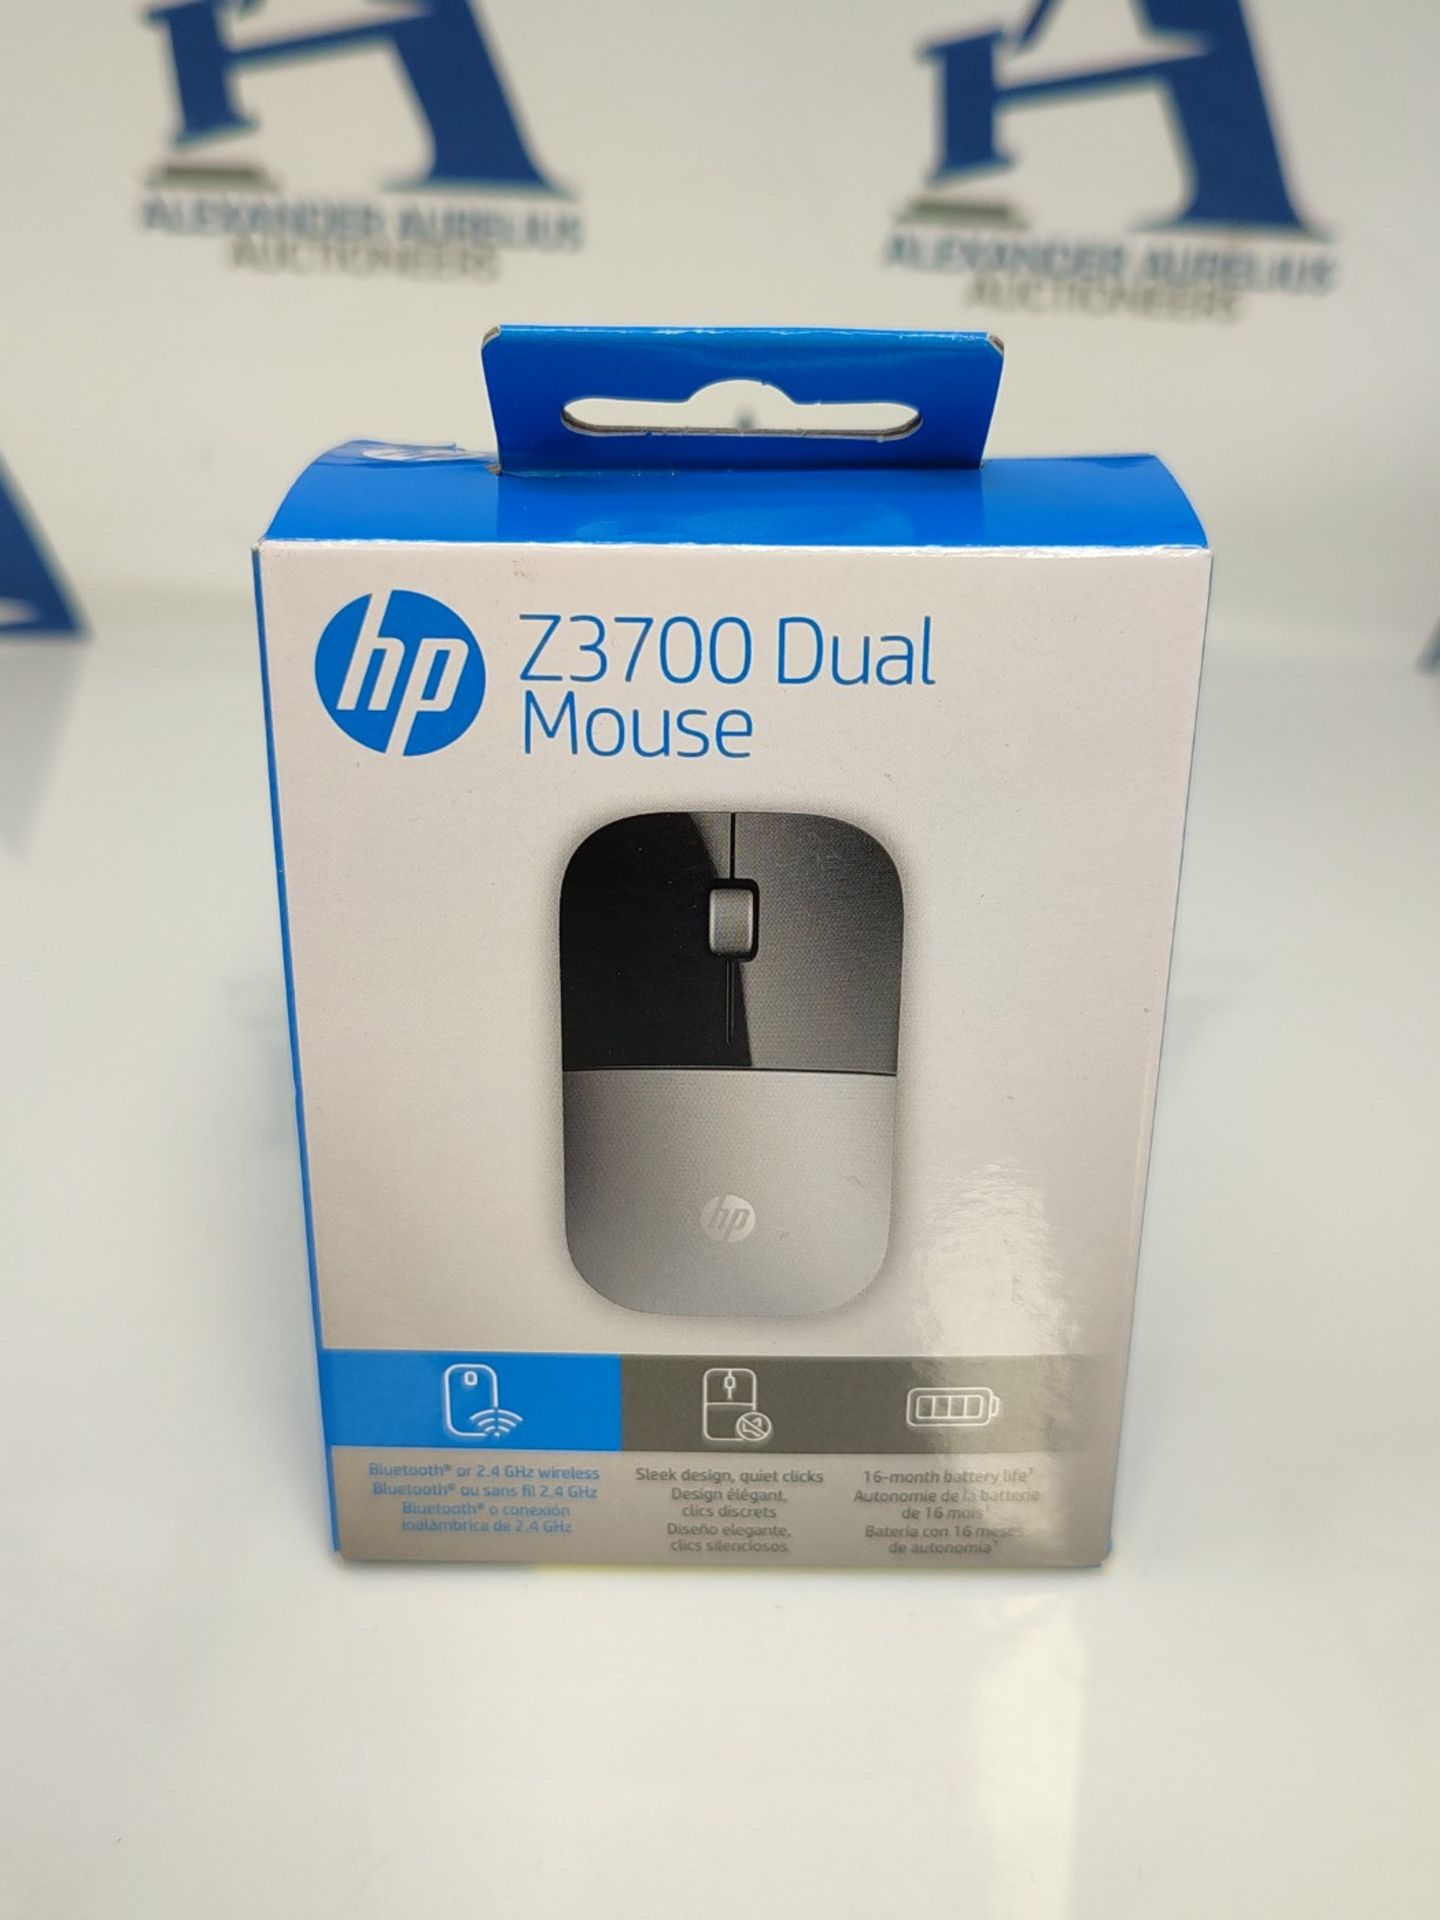 HP Z3700 Wireless Mouse | 1200 optical sensors | up to 16 months battery life | 2.4 GH - Image 2 of 3